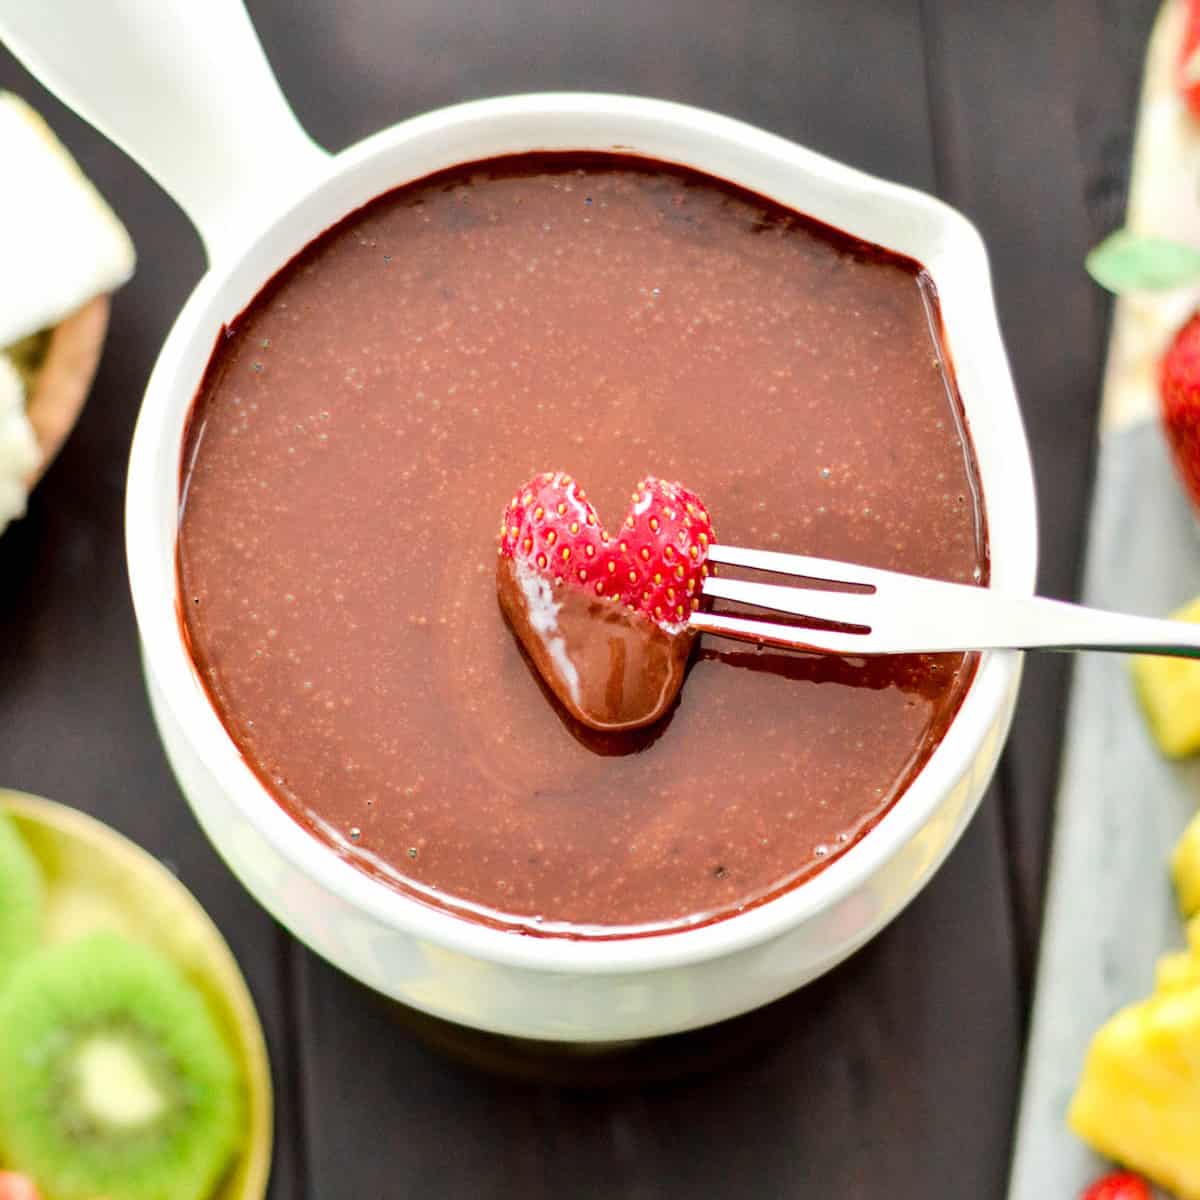 Overhead view of a heart-shaped strawberry being dipped into a bowl of Vegan Chocolate Fondue